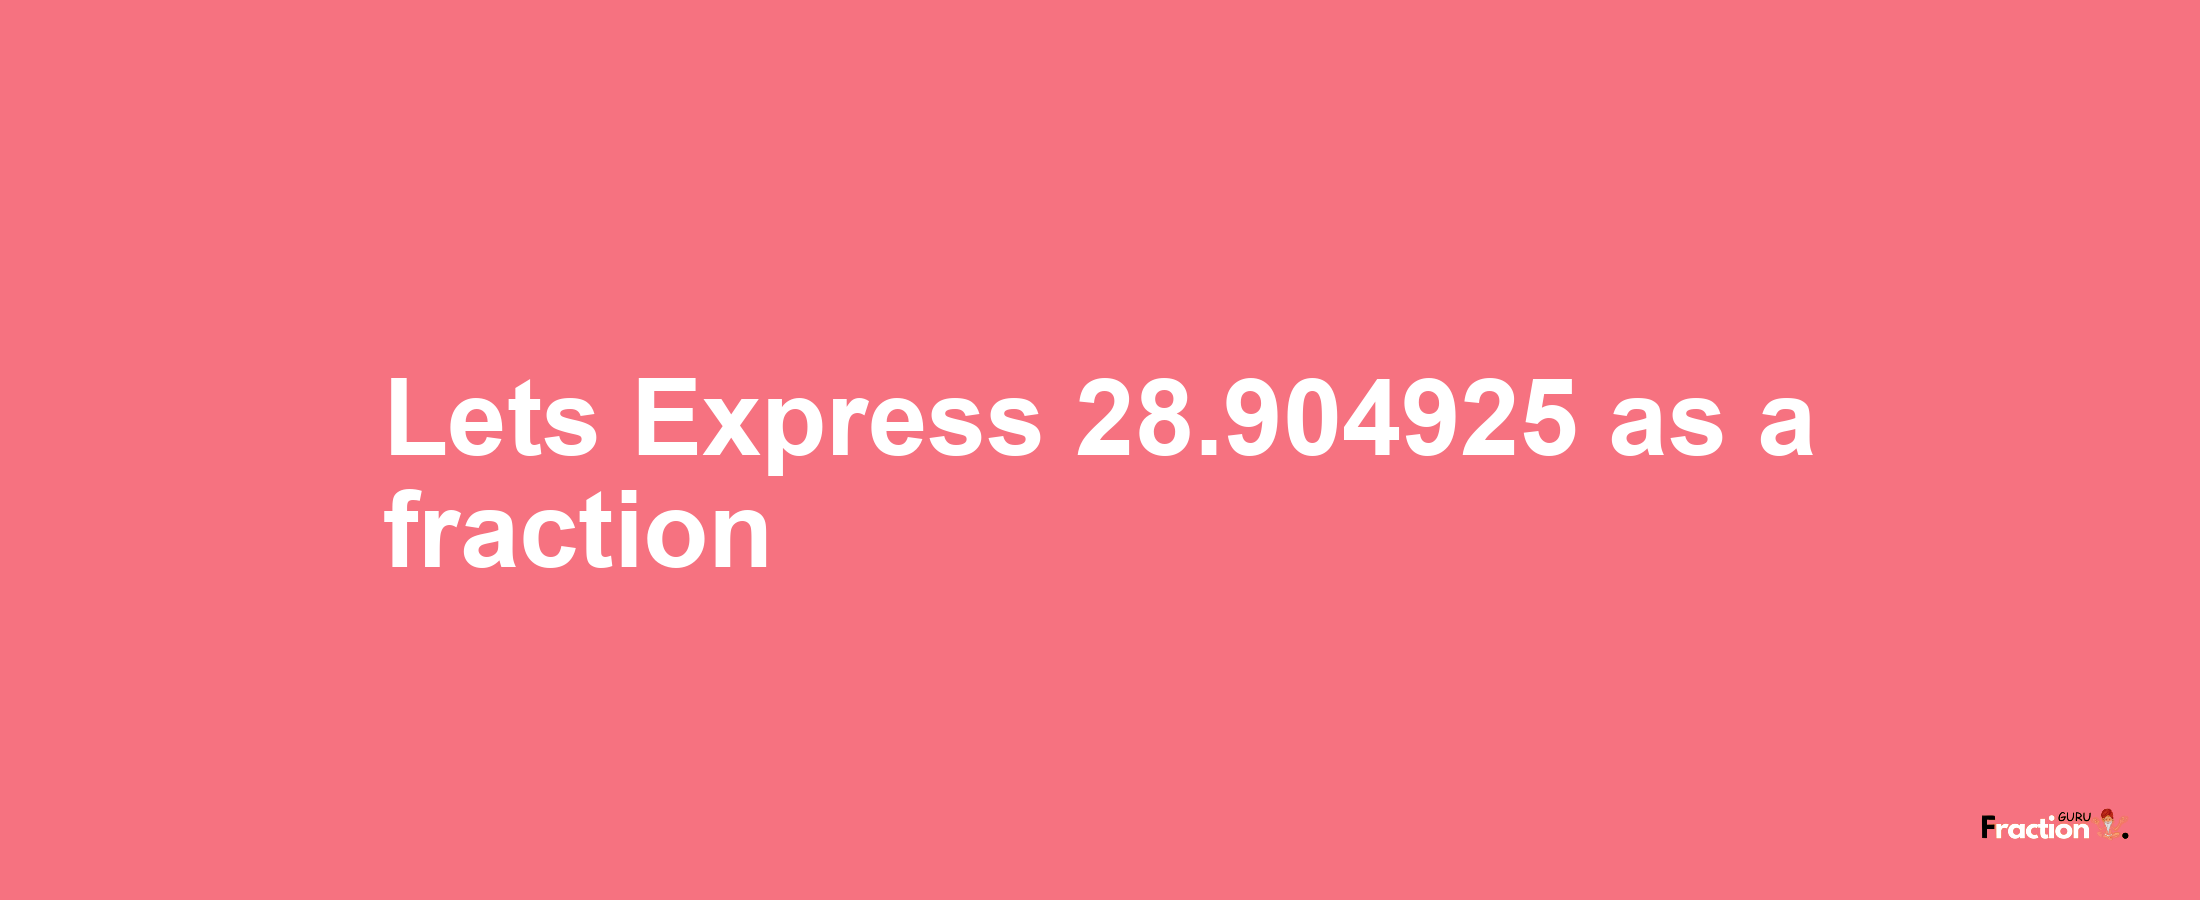 Lets Express 28.904925 as afraction